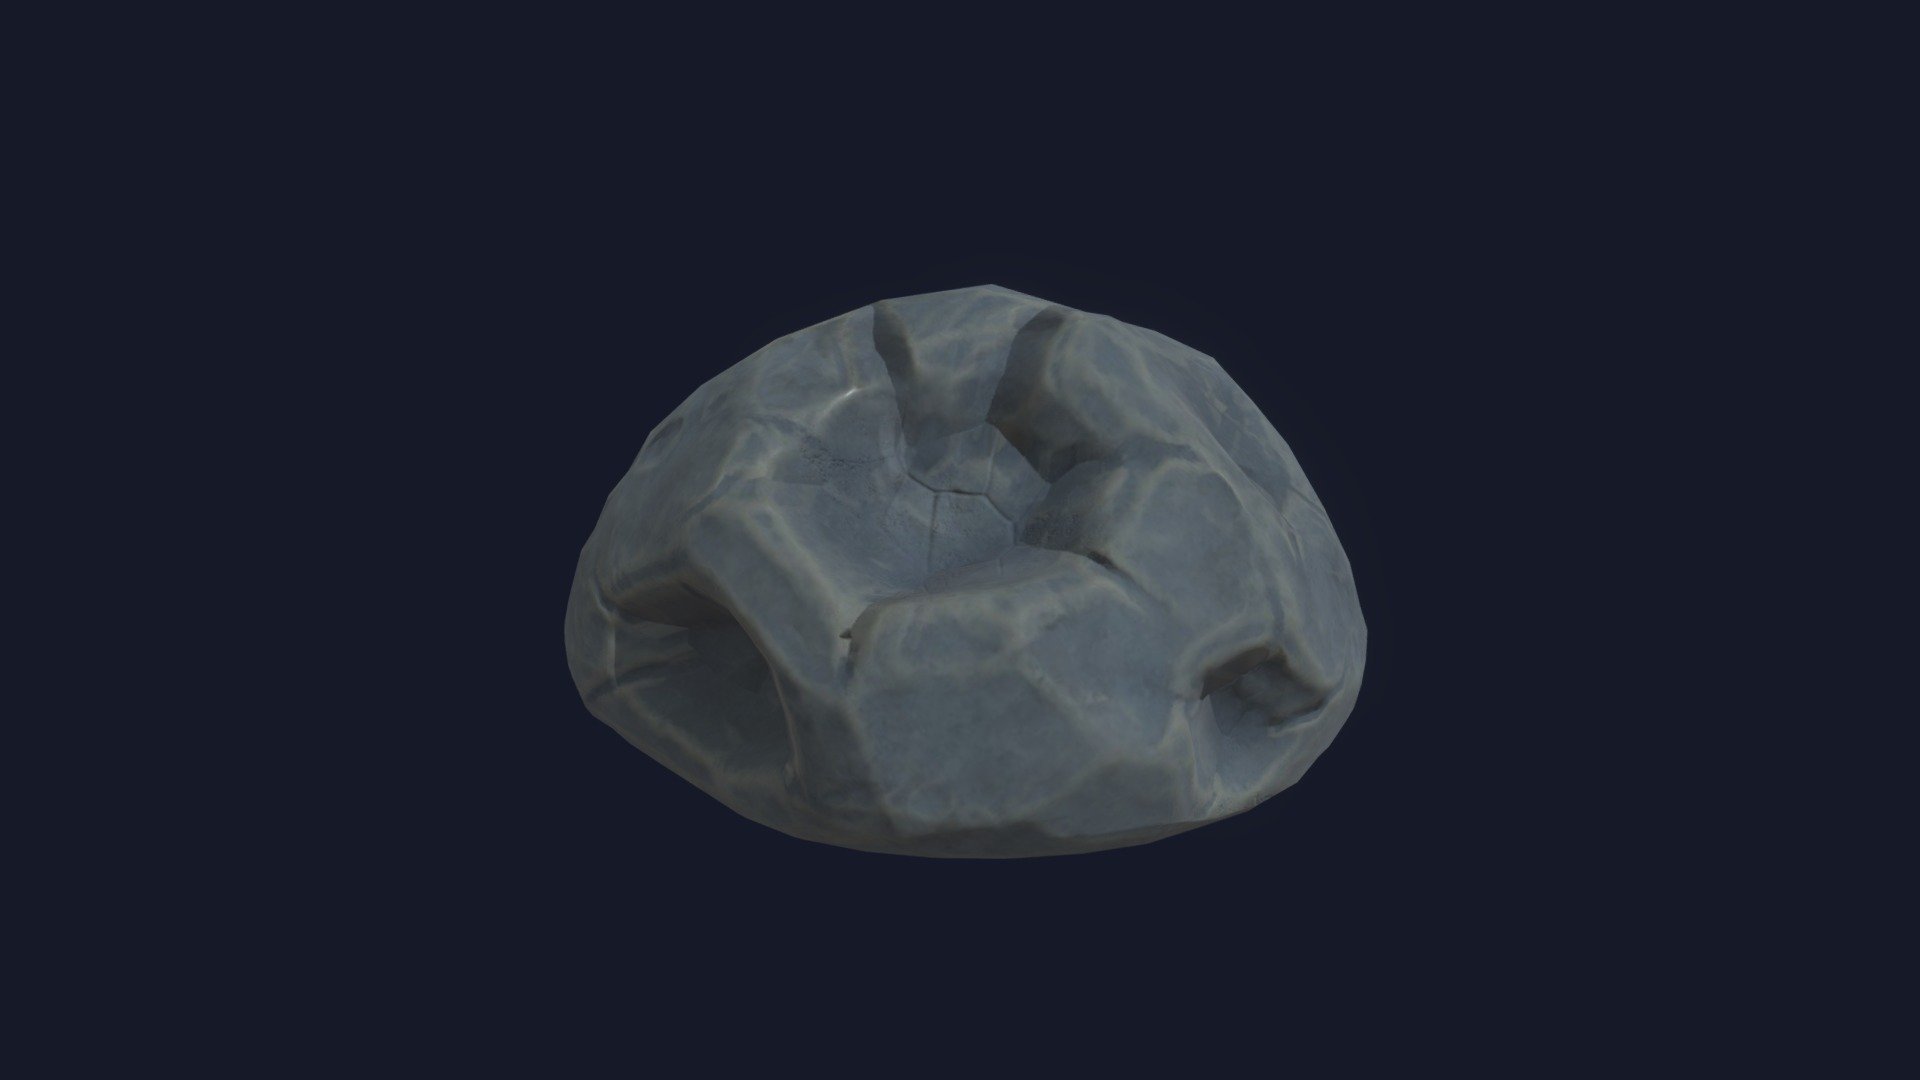 Sea of thieves style space rock

1800 tris - Space rock - Download Free 3D model by 11.10melons 3d model